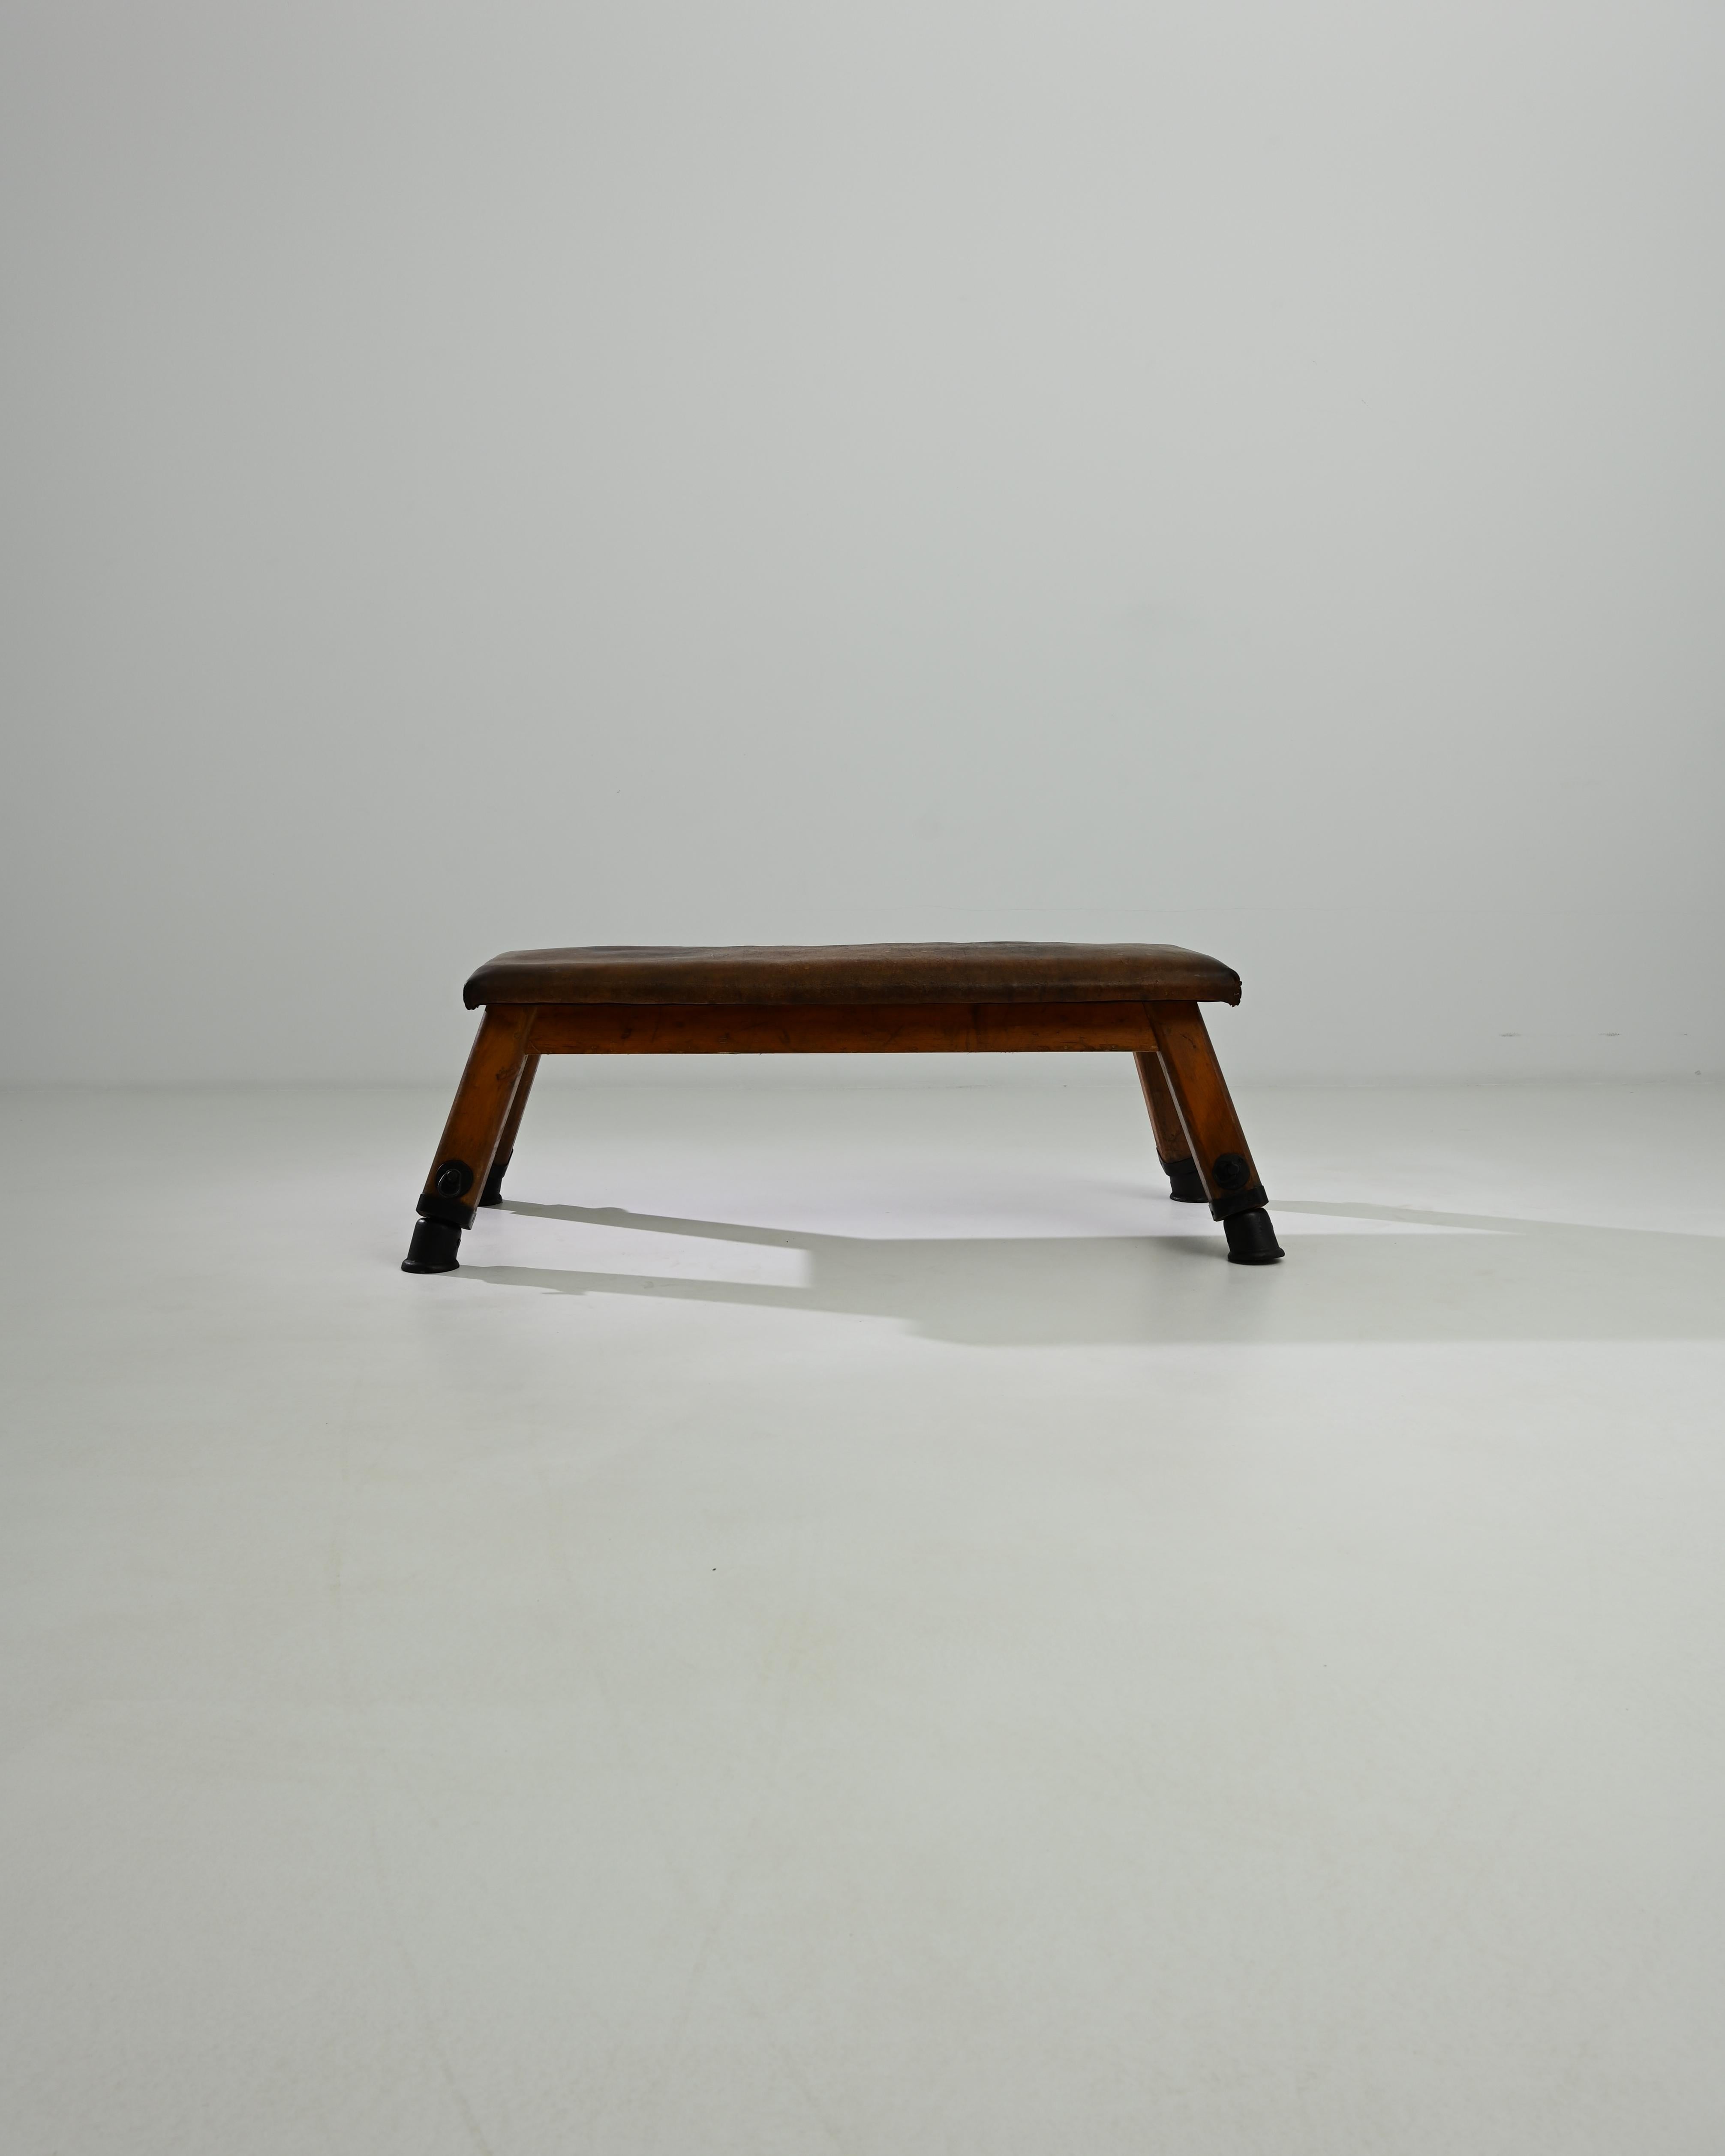 This leather pommel horse was made in Central Europe, circa 1950. A unique bench with a sense of history; handcrafted quality emits a sense of the robust – utility and a restful sense of ease. Originally used by gymnasts for swinging and balancing